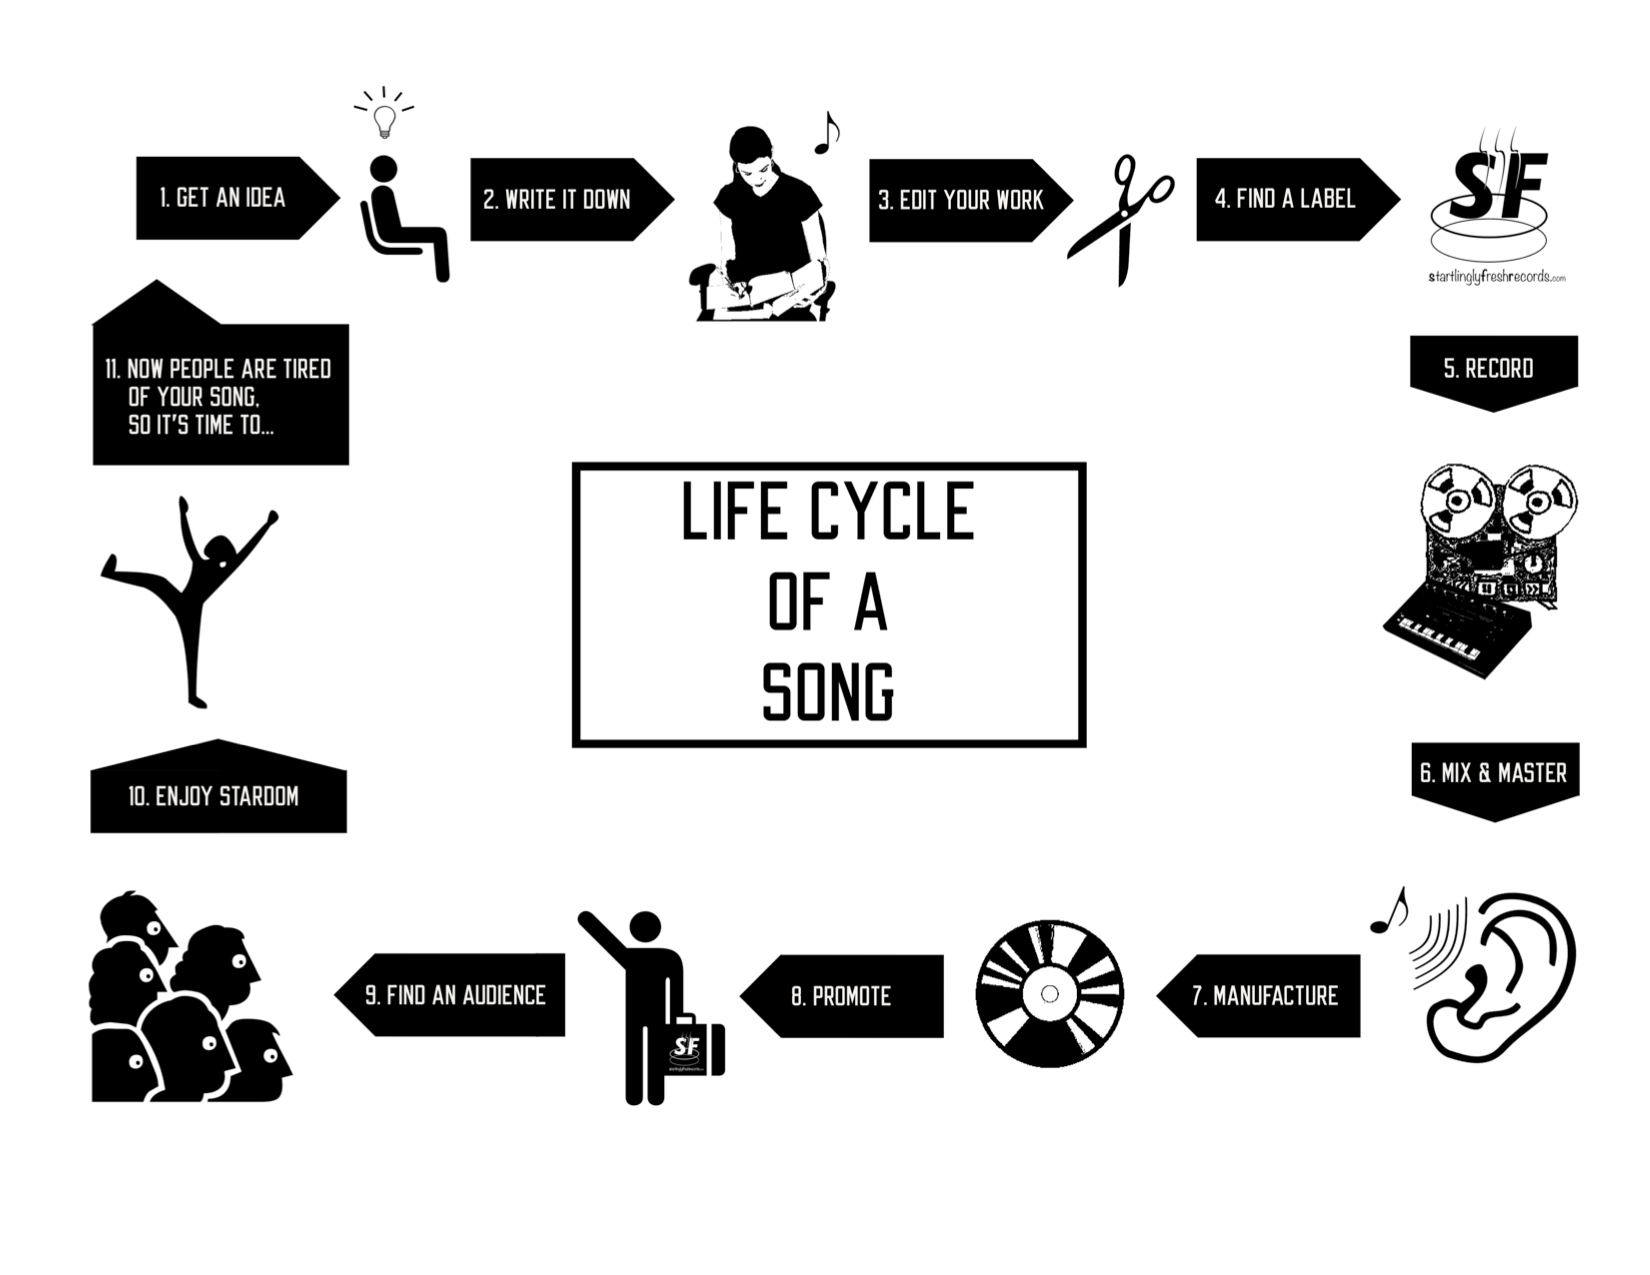 Life Cycle of a Song